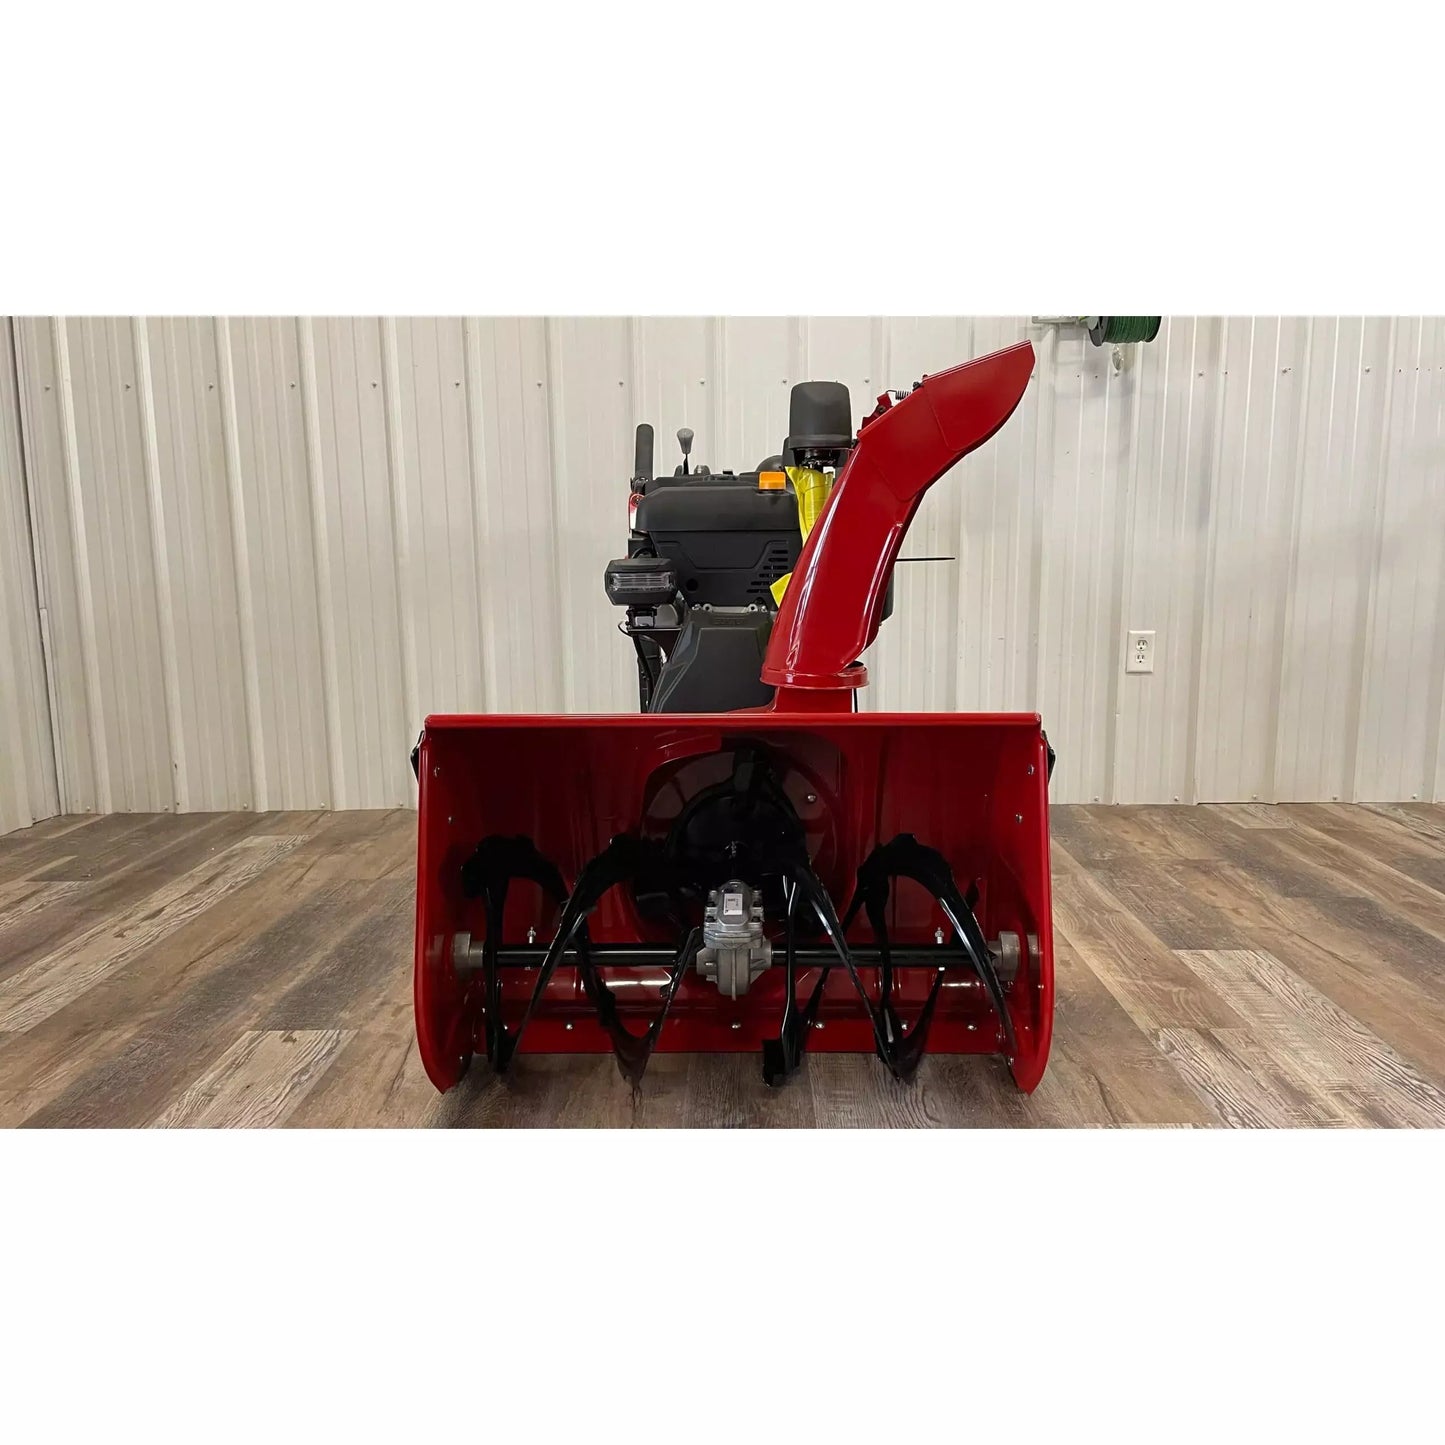 32" Power TRX HD 1432 OHXE Commercial Two-Stage Gas Snow Blower